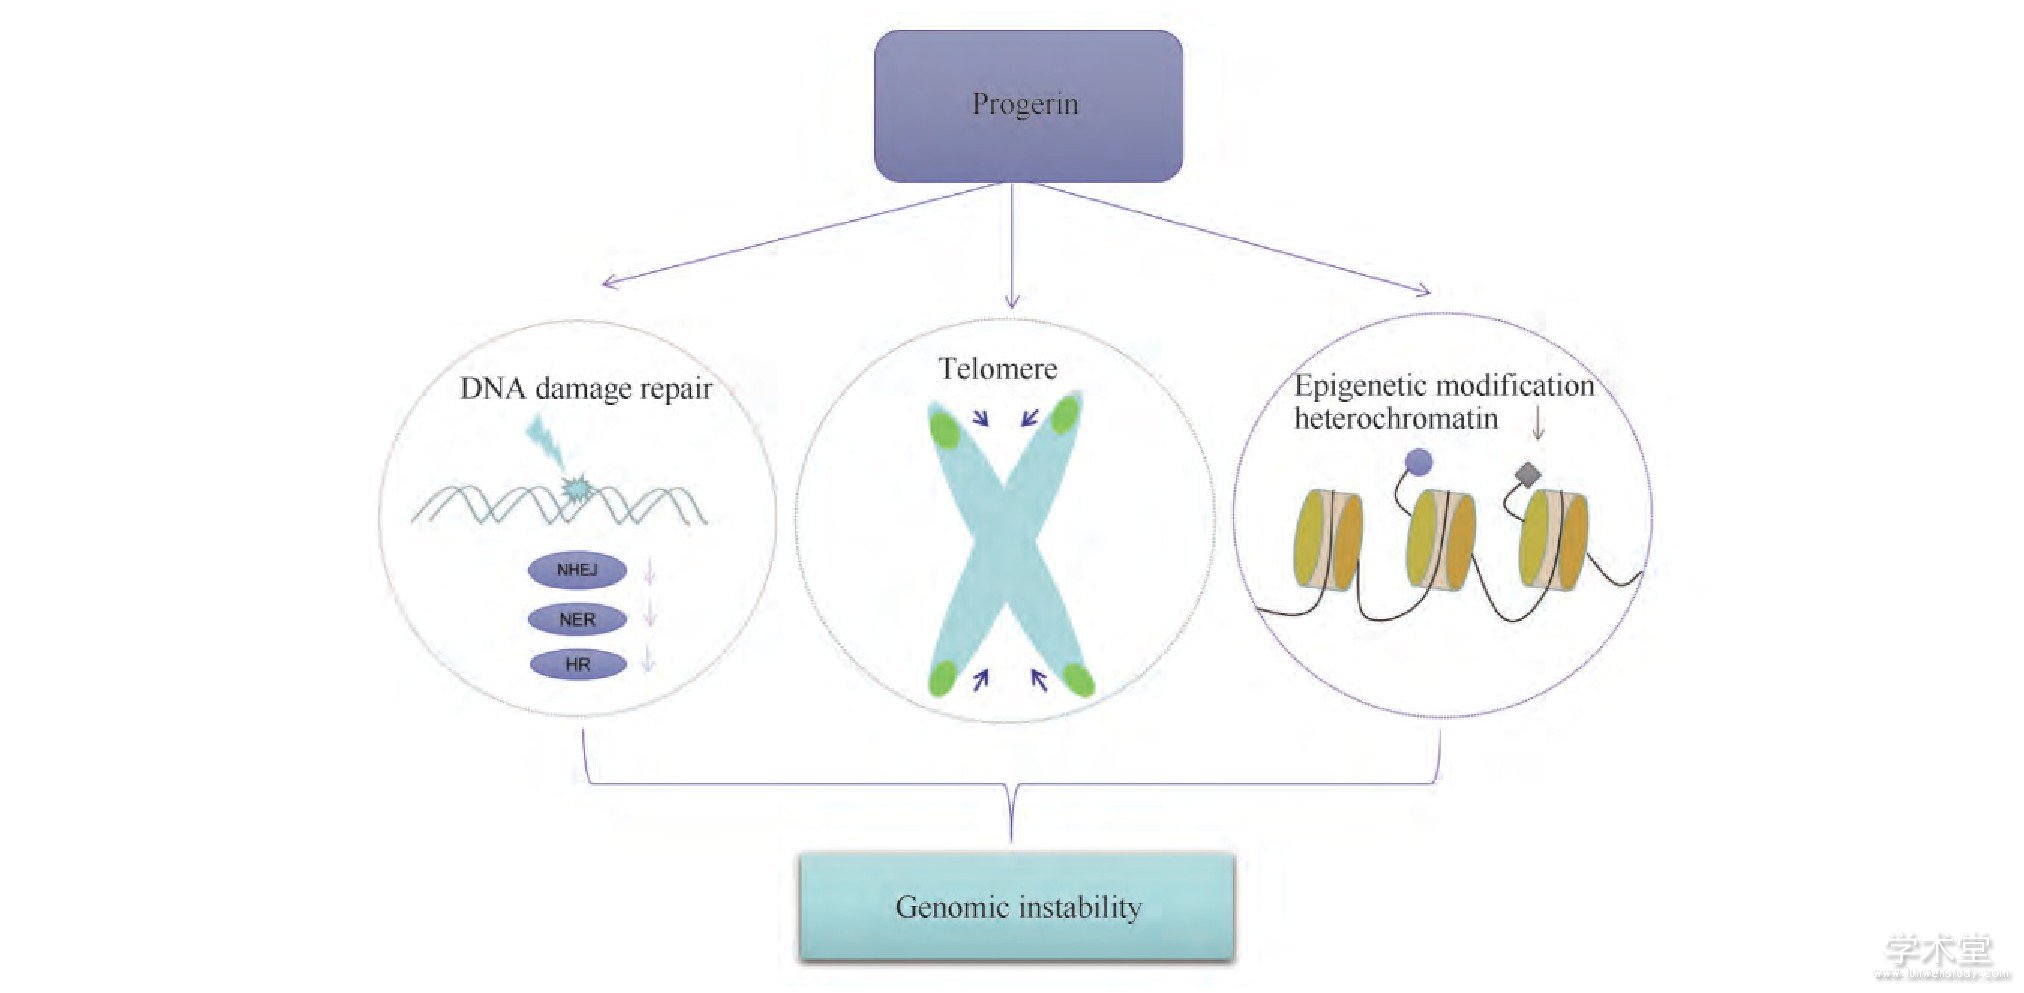 Fig.1 Genomic instability caused by progerin